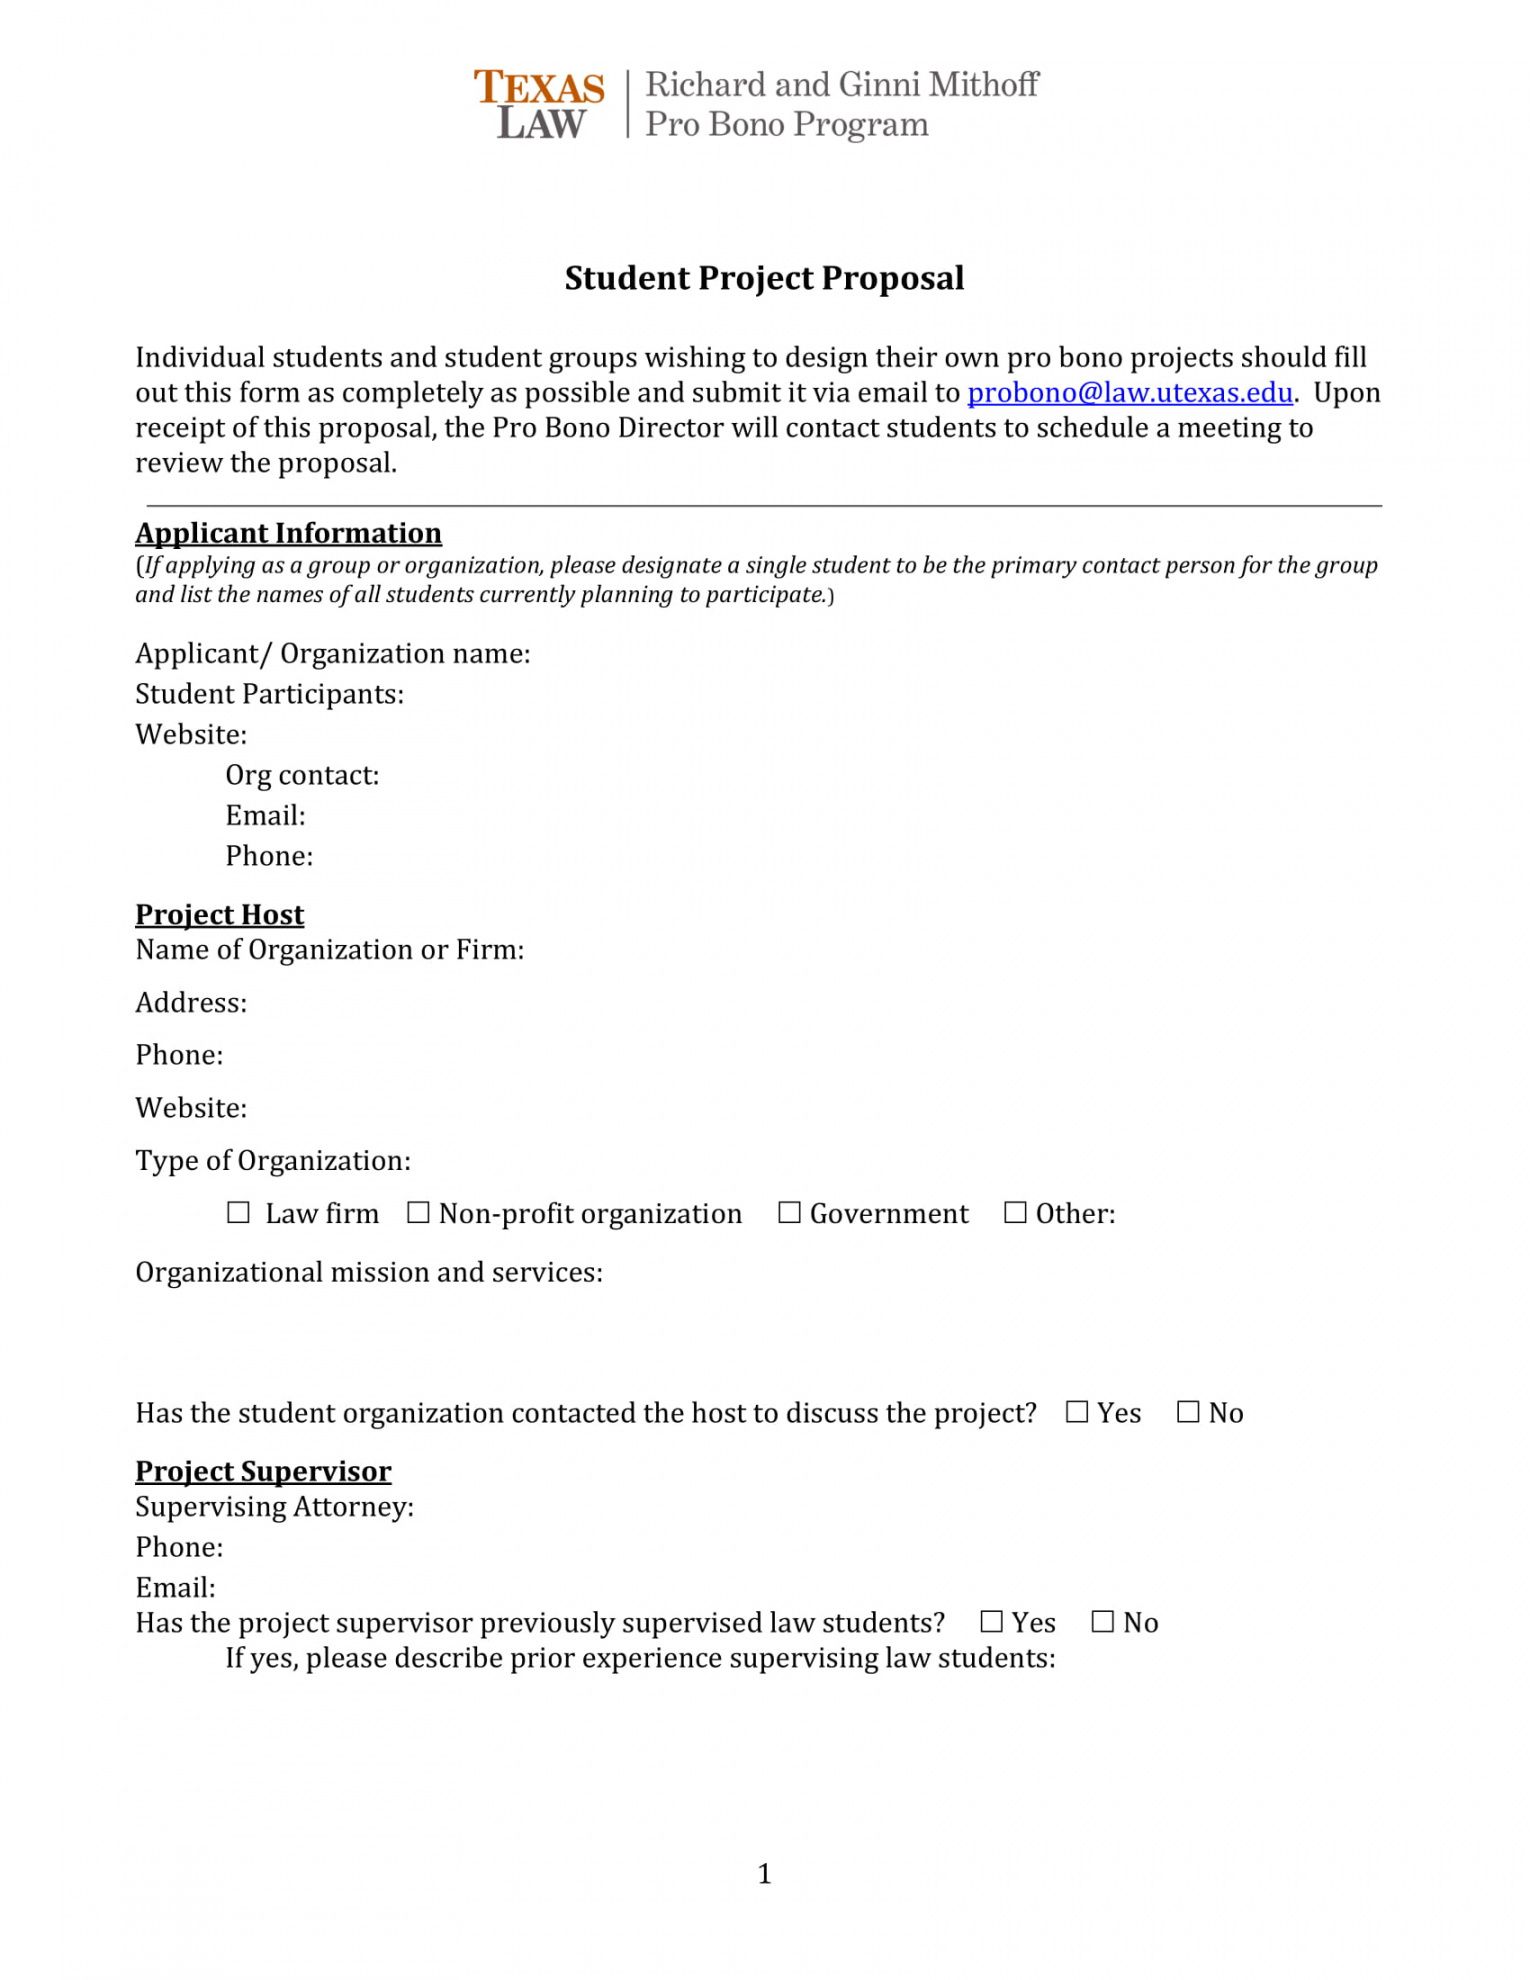 Basic Project Proposal Template